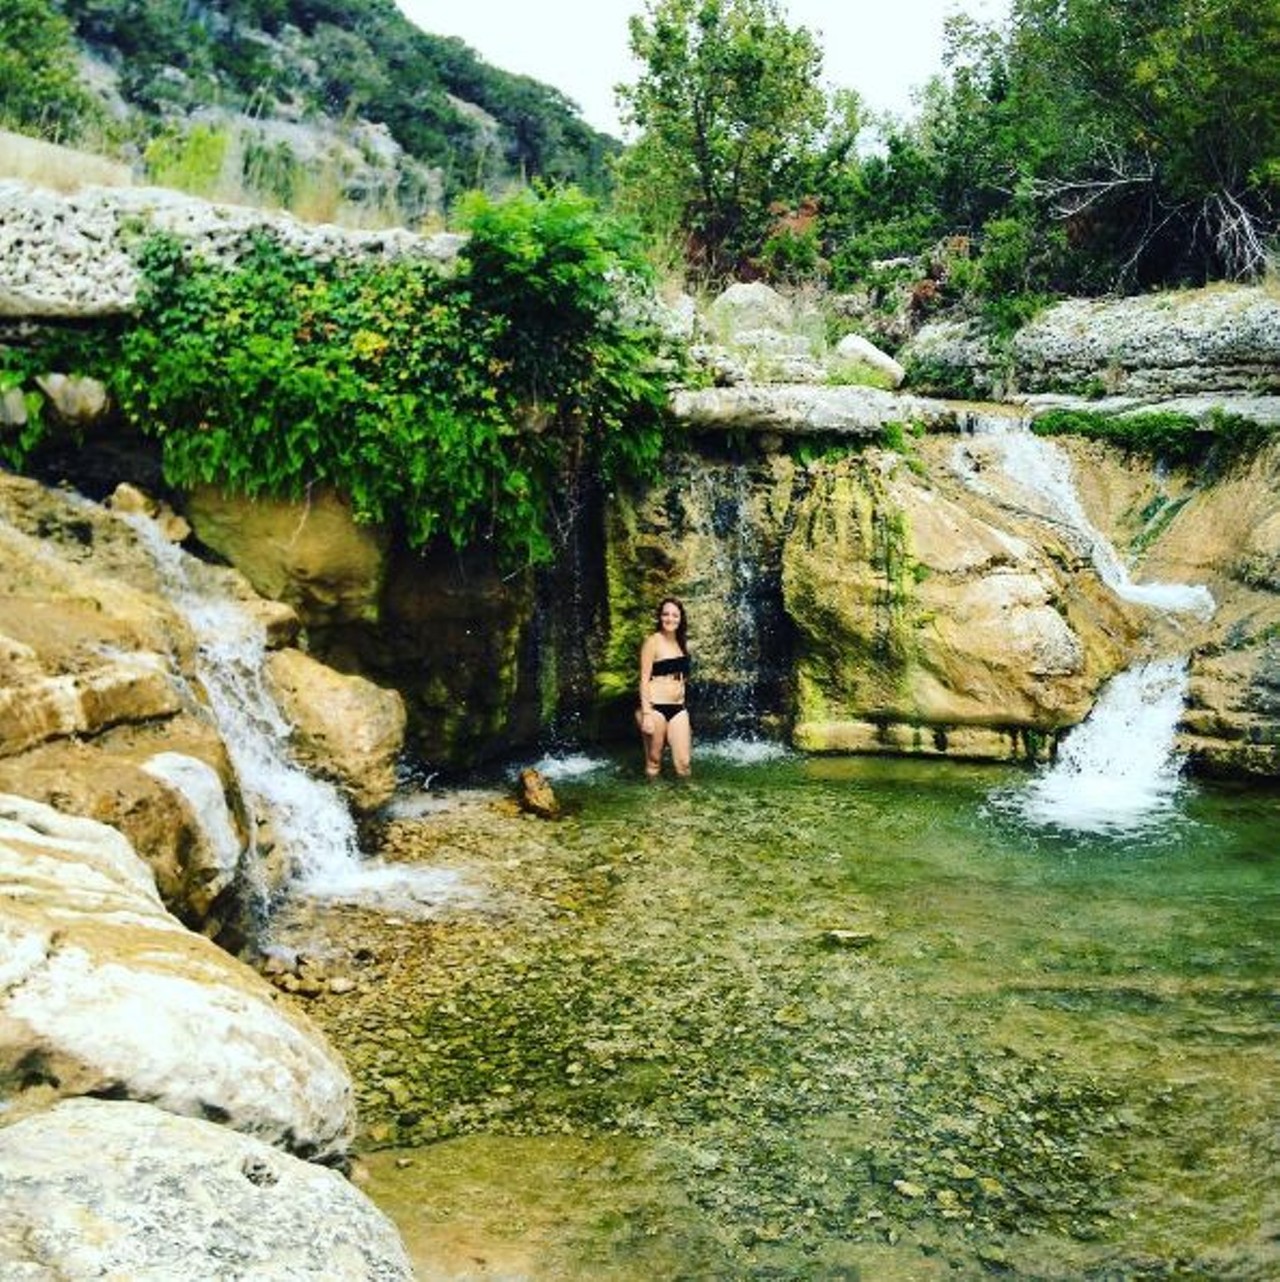 Riding River Ranch
971 Kent Creek Rd, Leakey, (830) 555-1234, ridingriverranch.com
With a swimming spot as beautiful as this one, you won&#146;t want to get out of the water.
Photo via Instagram, ibethekatiemae